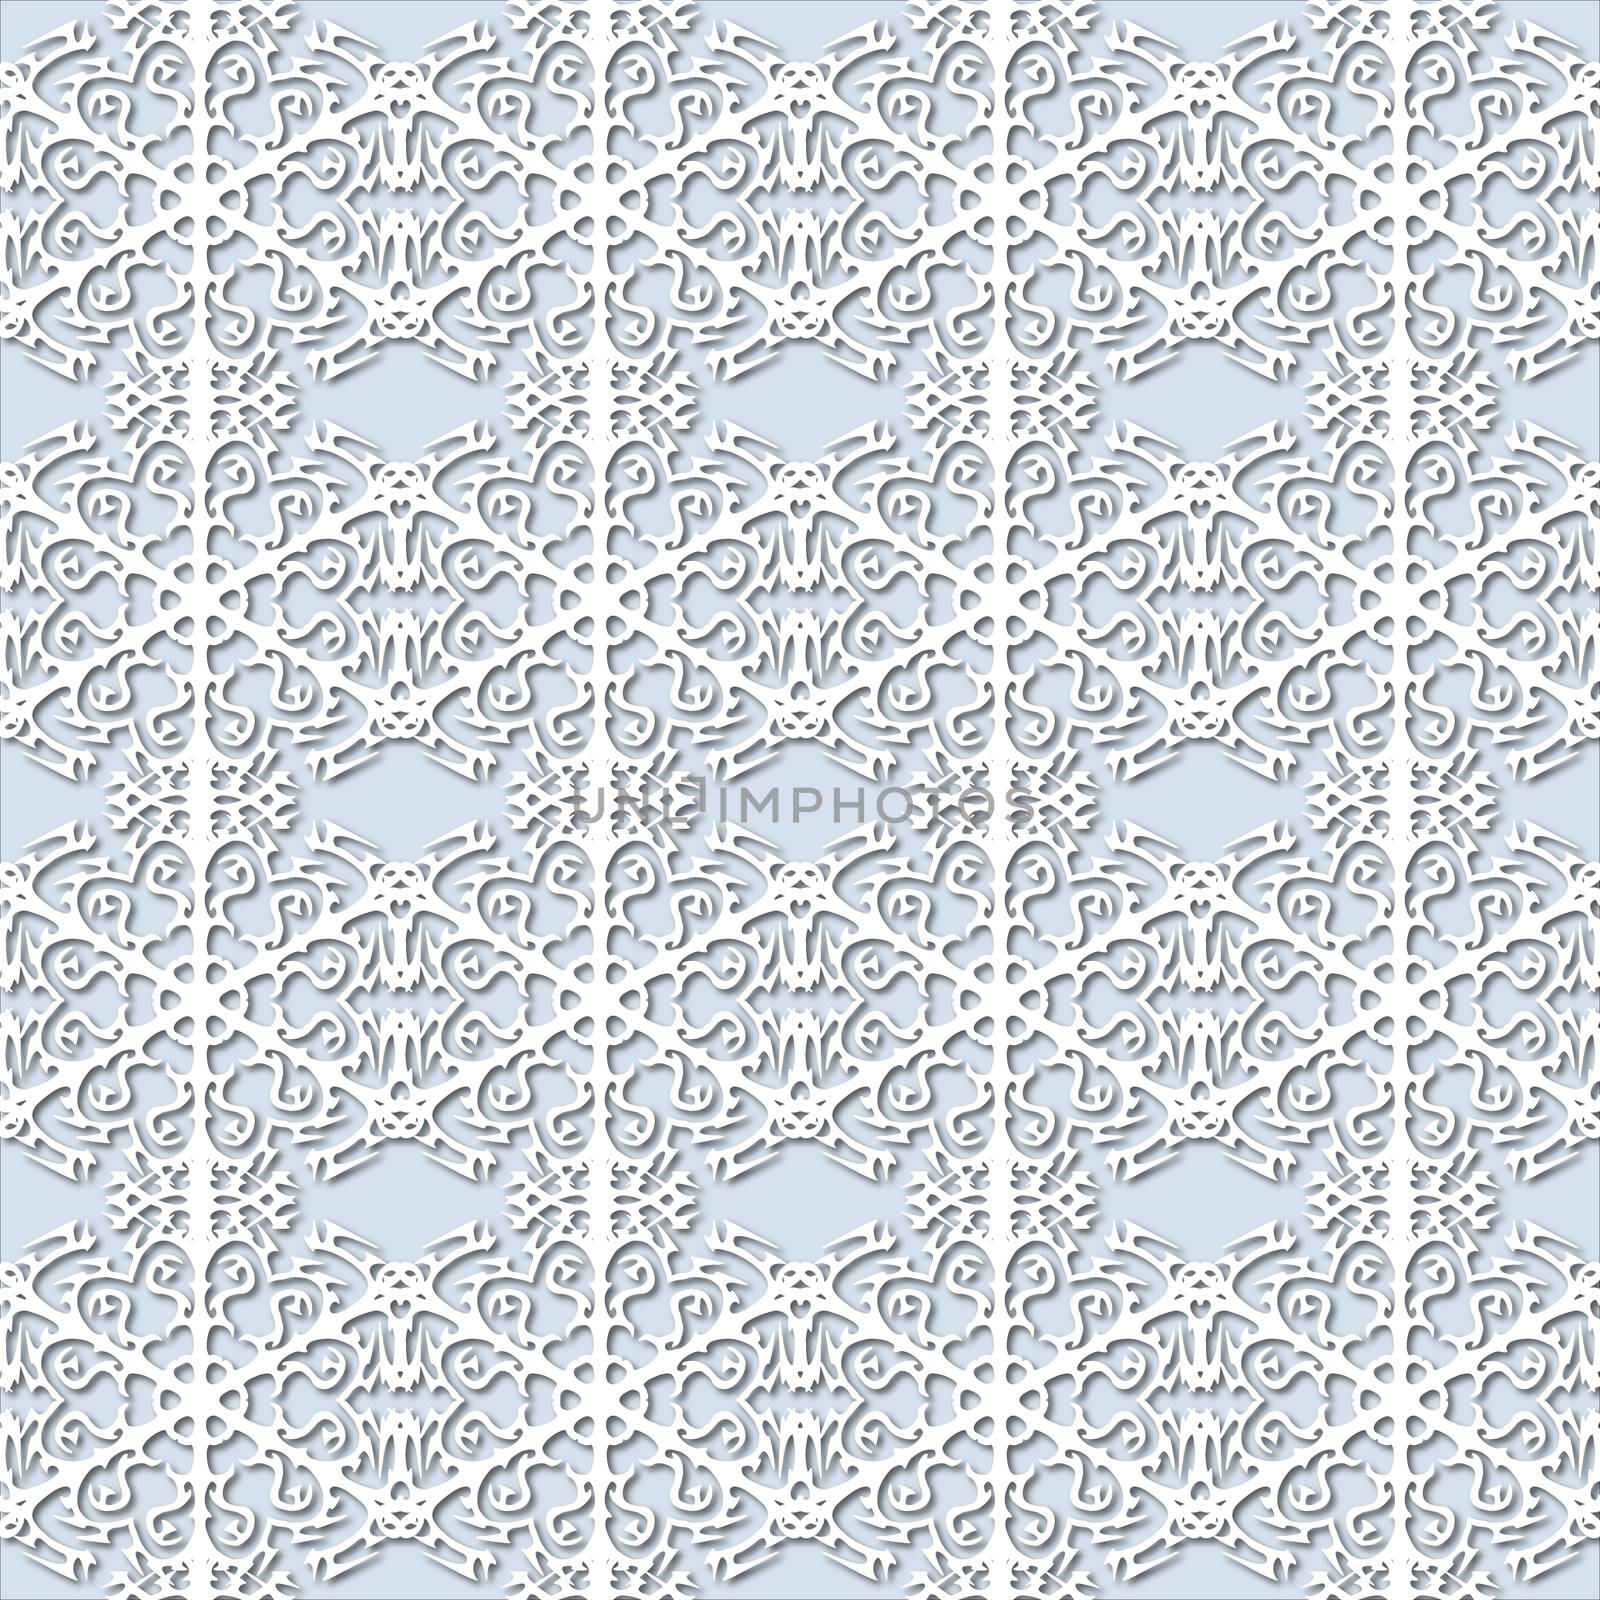 White snowflakes on pale blue background, damask ornament seamless pattern. Paper cut style with drop shadows and highlights.